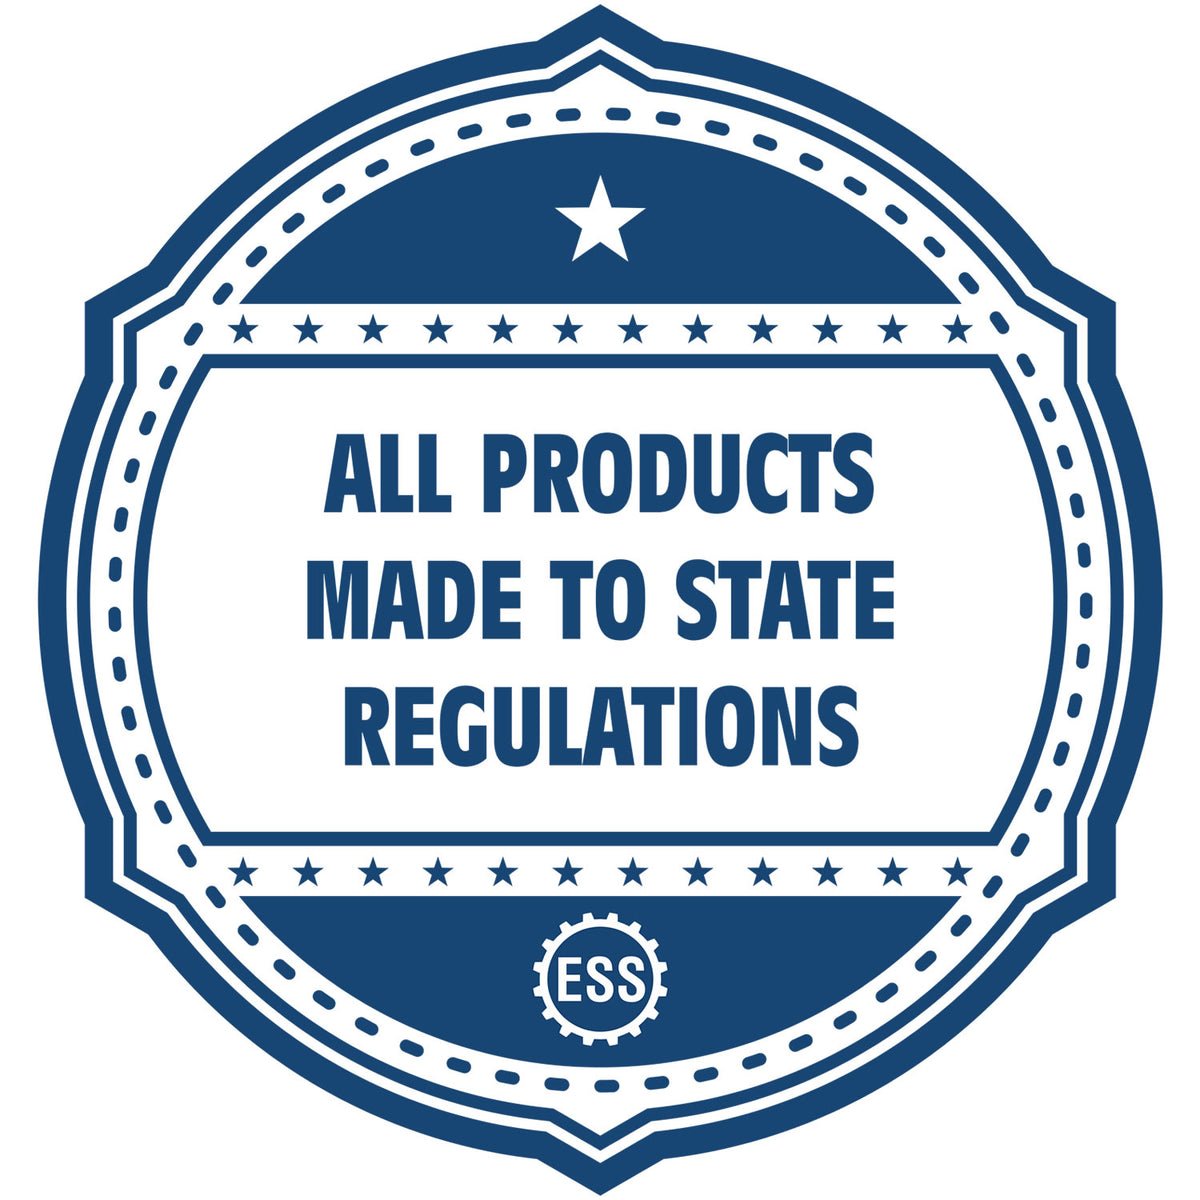 An icon or badge element for the Self-Inking Minnesota PE Stamp showing that this product is made in compliance with state regulations.